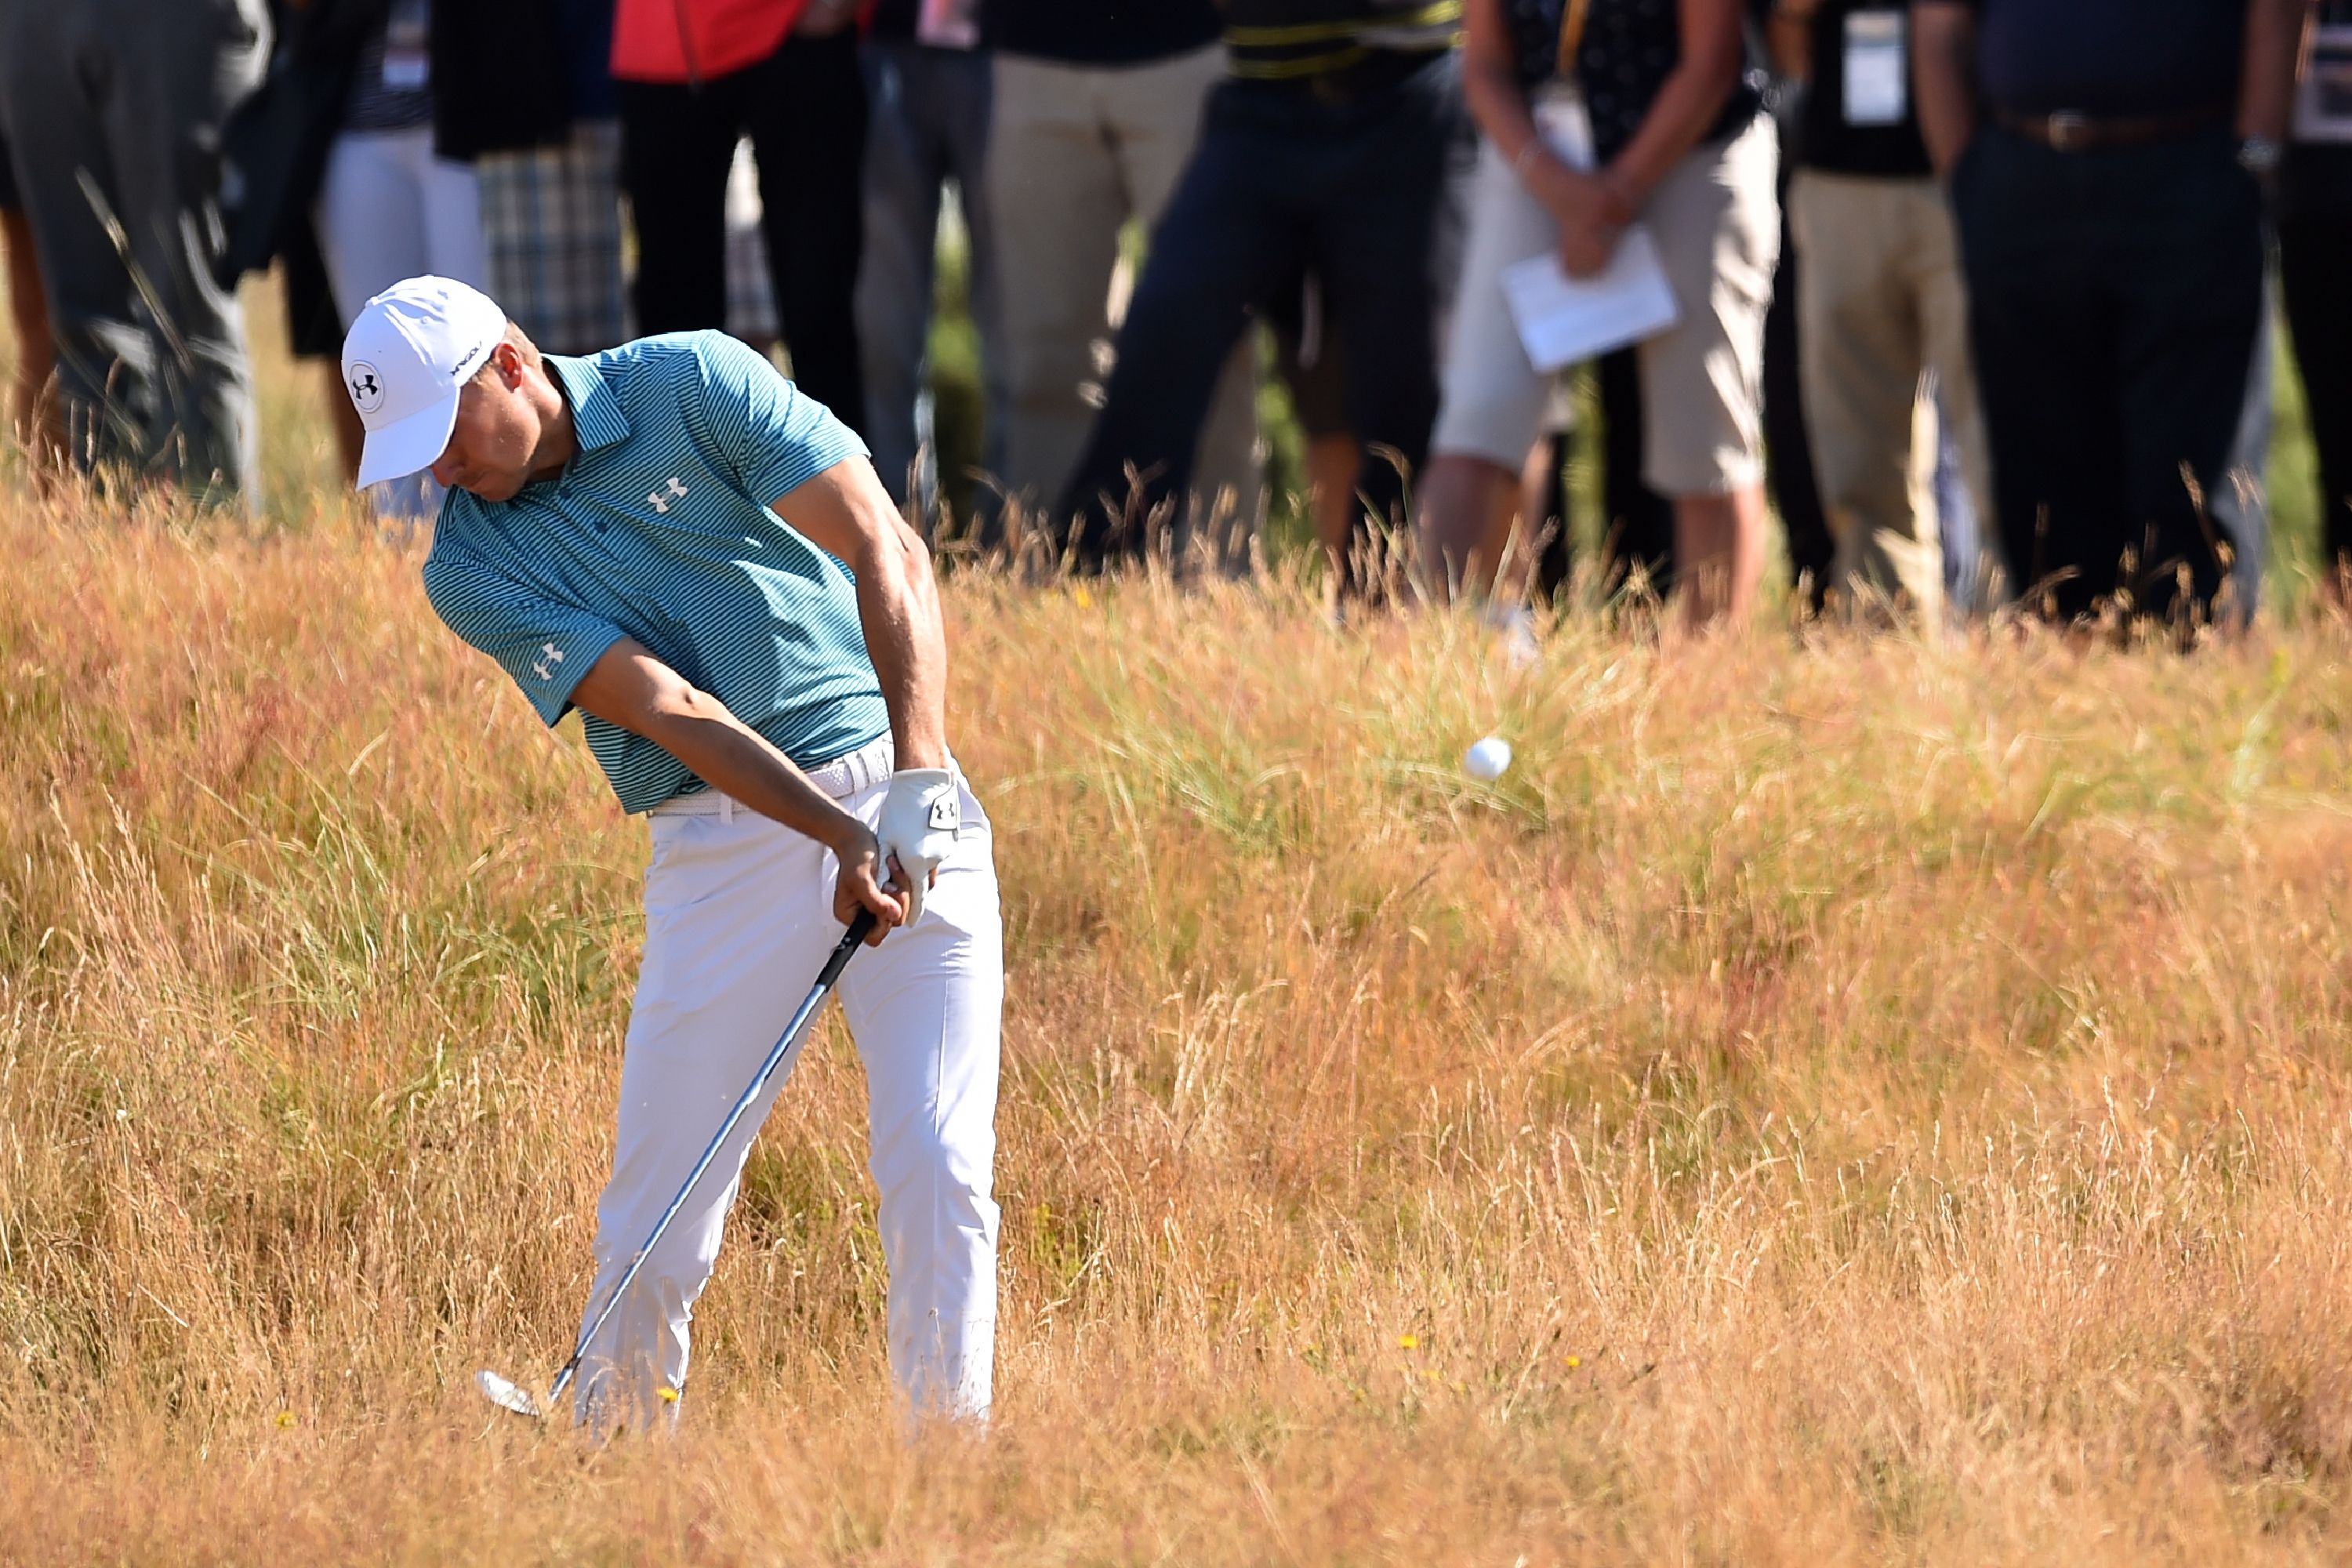 Jordan Spieth says brain fart ruined his first round at Open